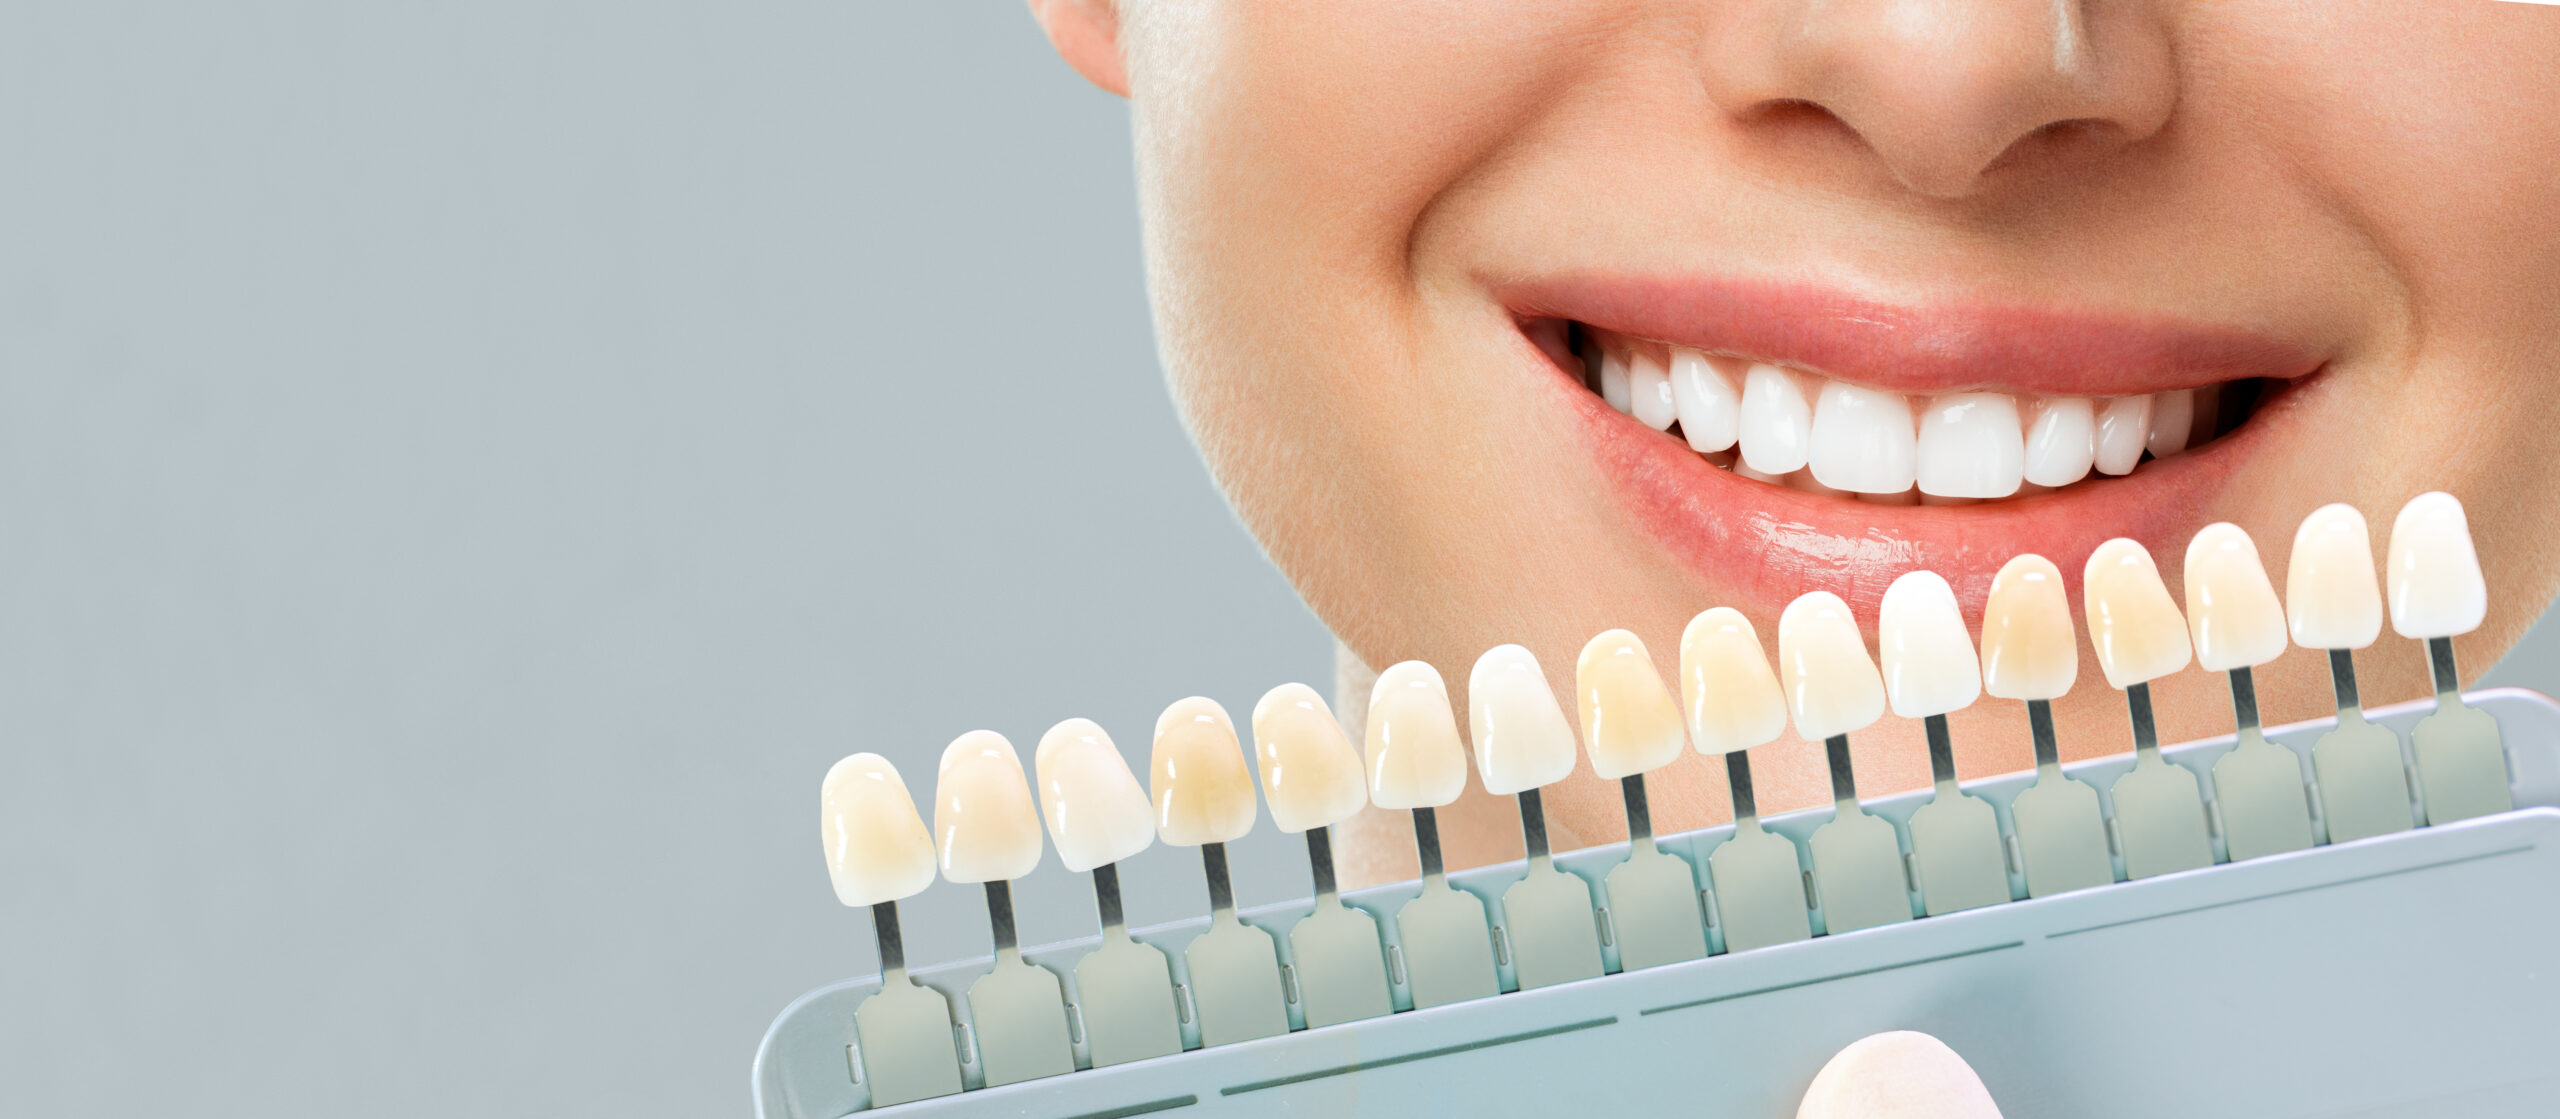 Cosmetic dentistry is not only to fix your smile and make it stunning, but it will also straighten your self-esteem and how you feel about yourself.